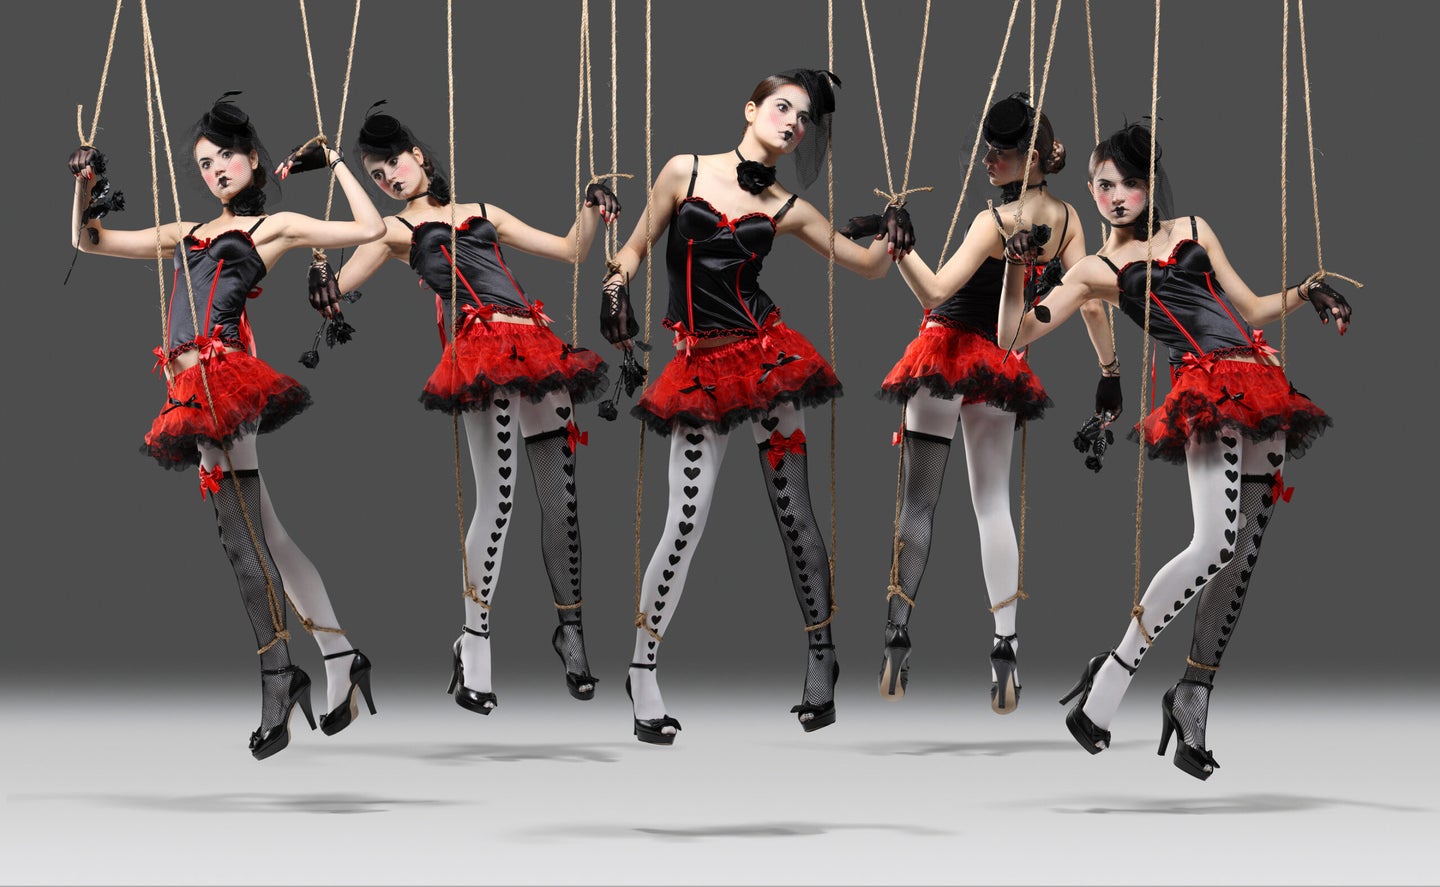 Five dancers held up by puppet strings.